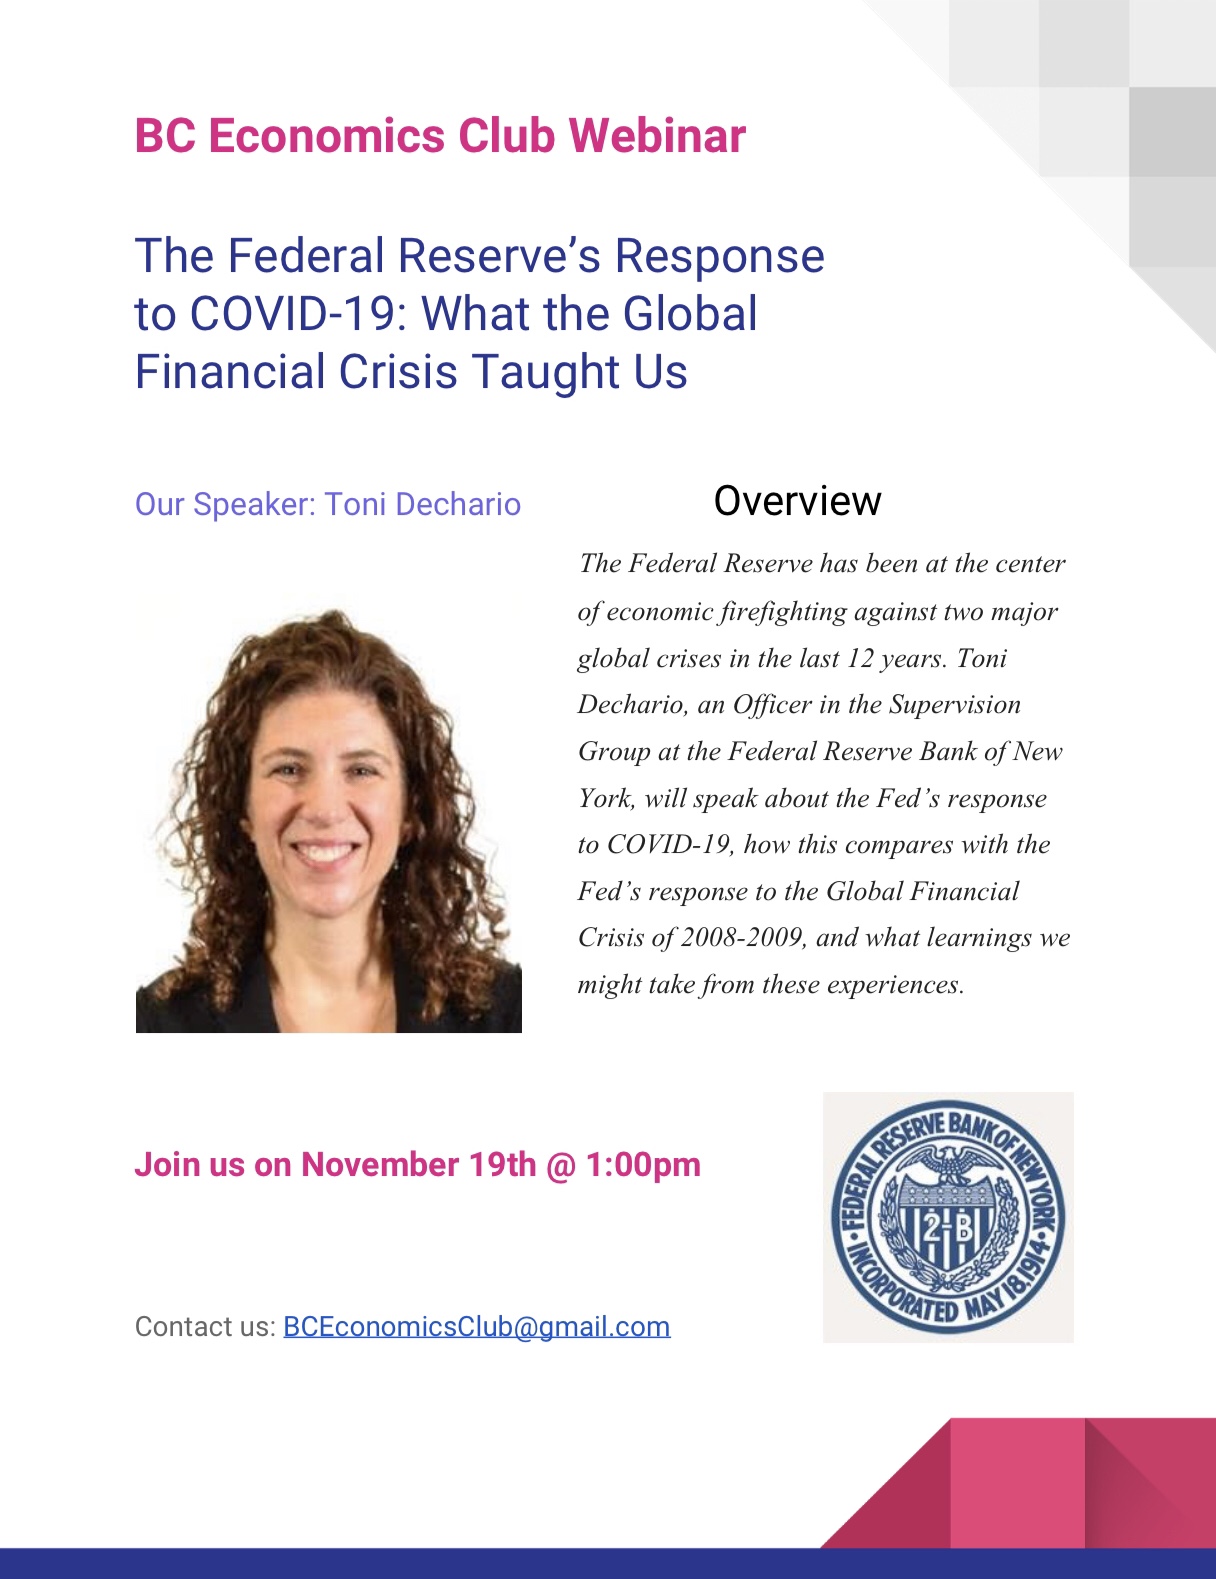 Webinar—The Federal Reserve's Response to COVID-19: What the Global Financial Crisis Taught Us, With Toni Dechario